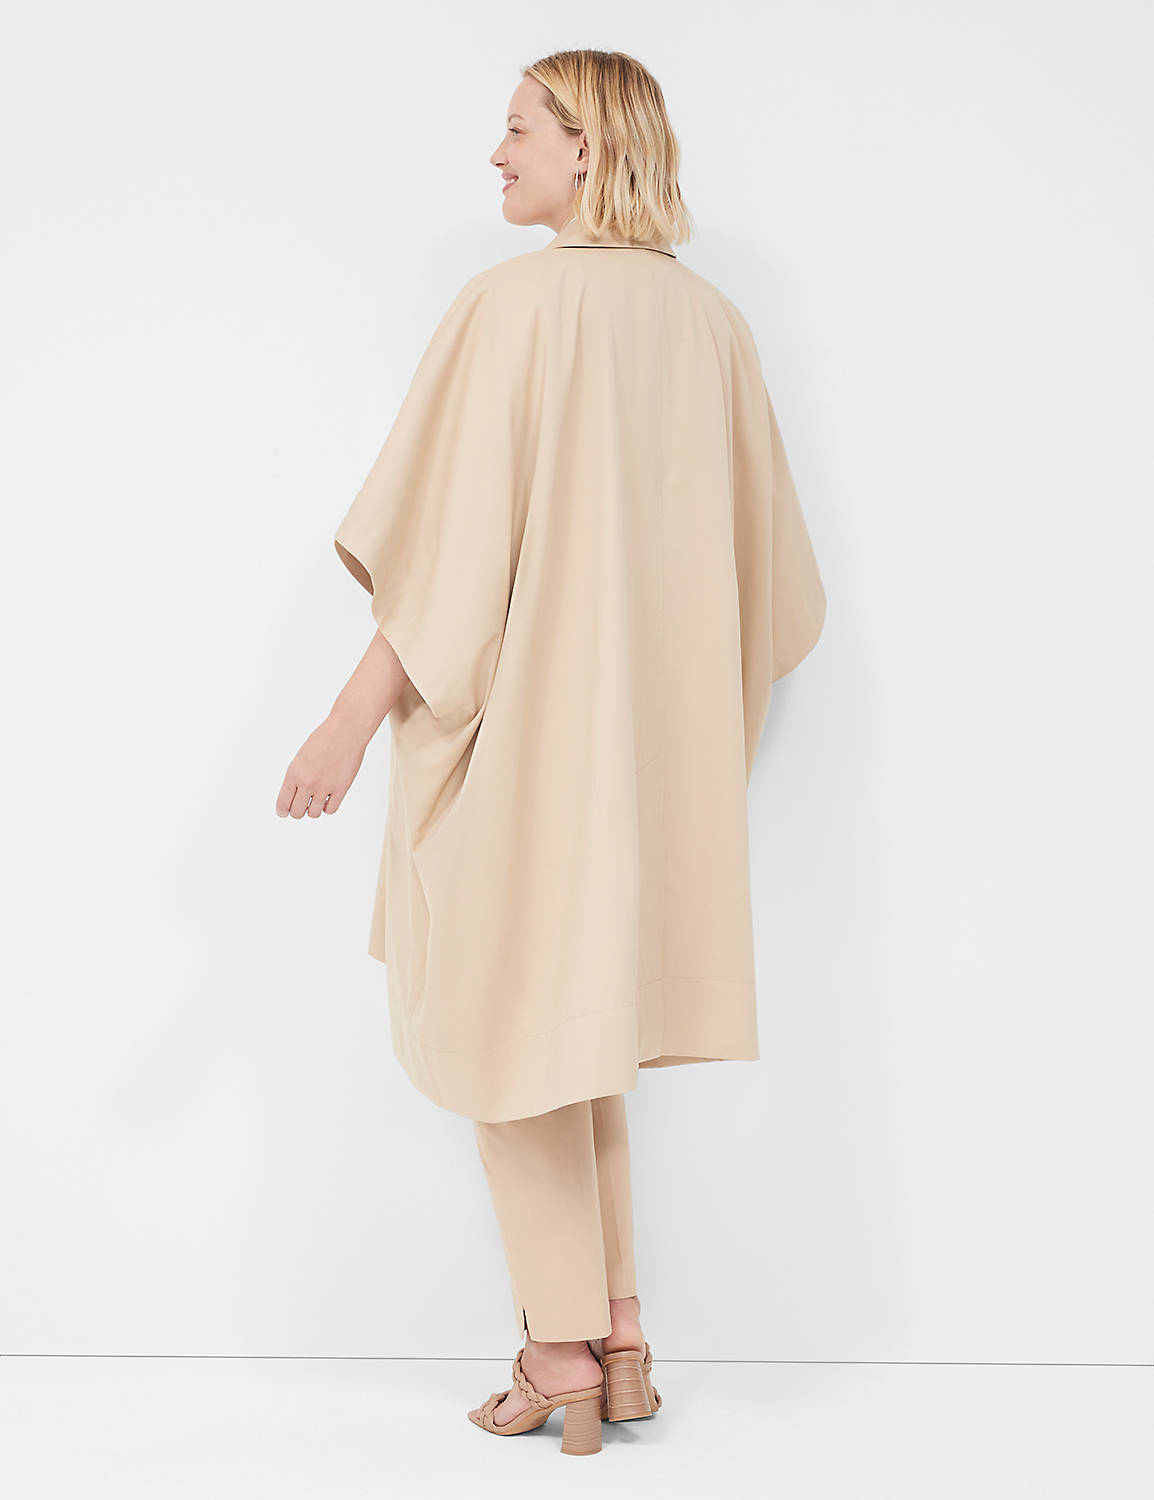 Trench Cape 1138996 Product Image 2